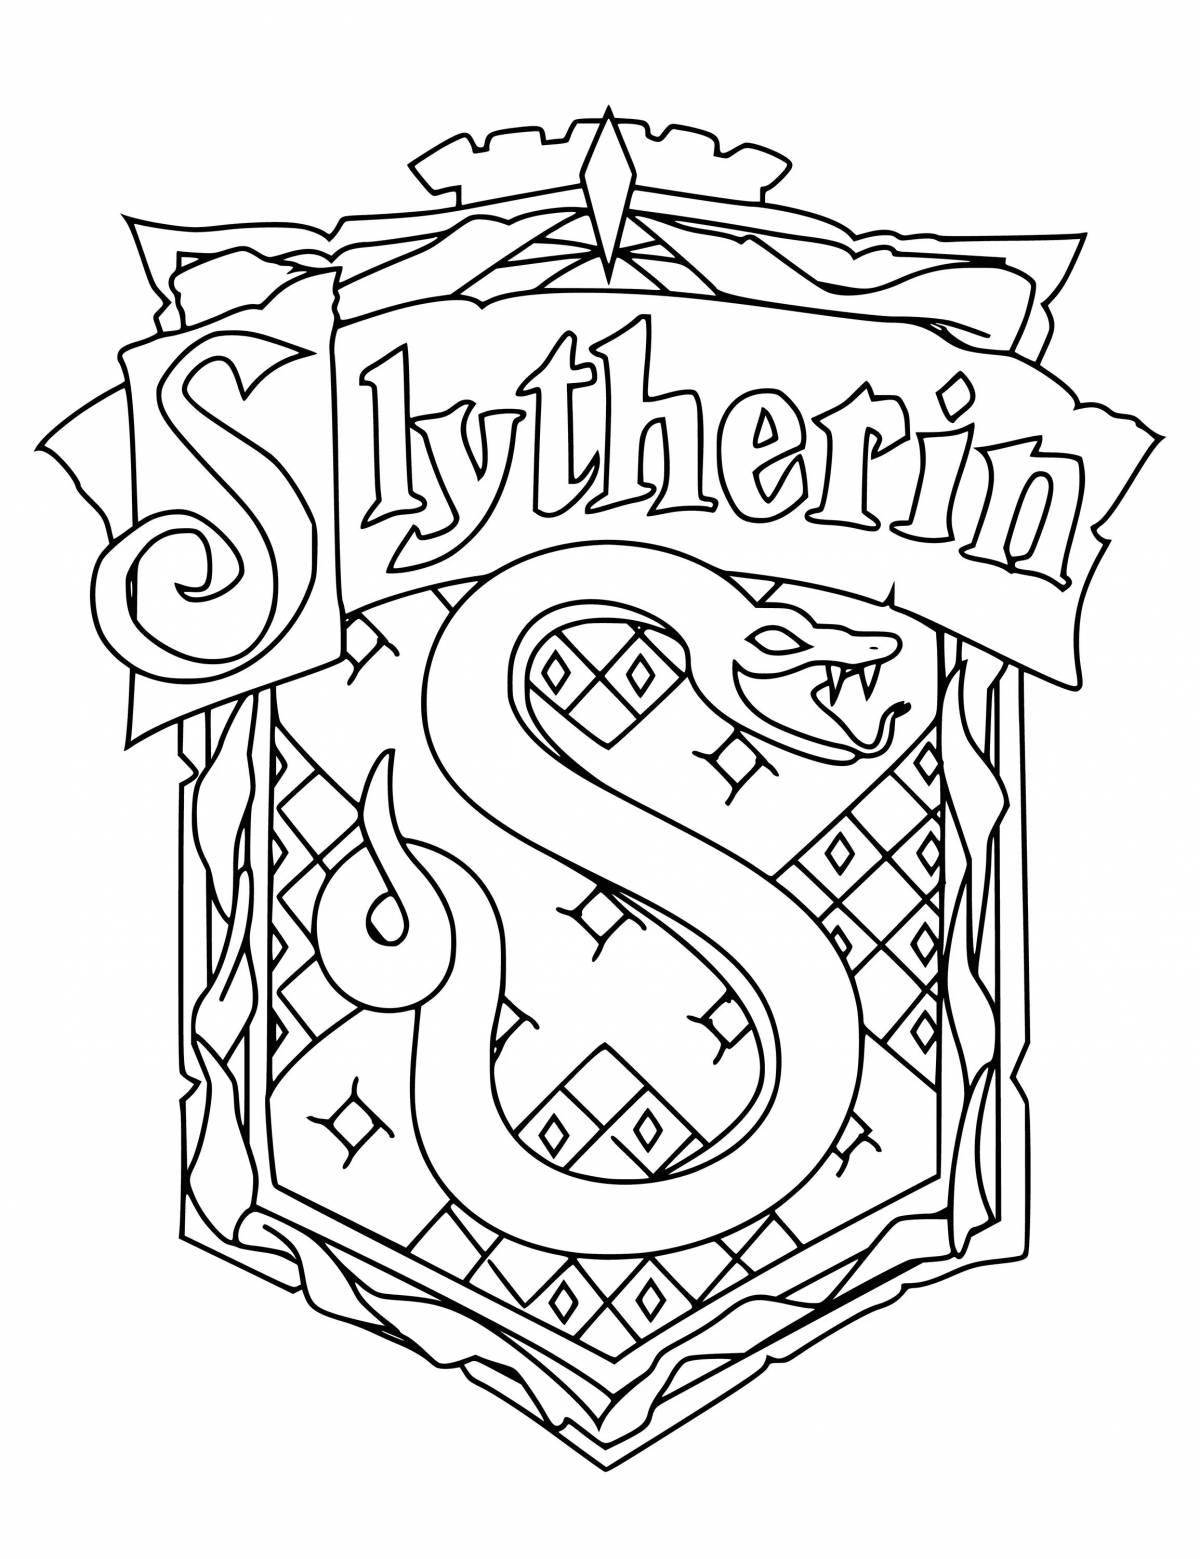 Dazzling Gryffindor coloring page